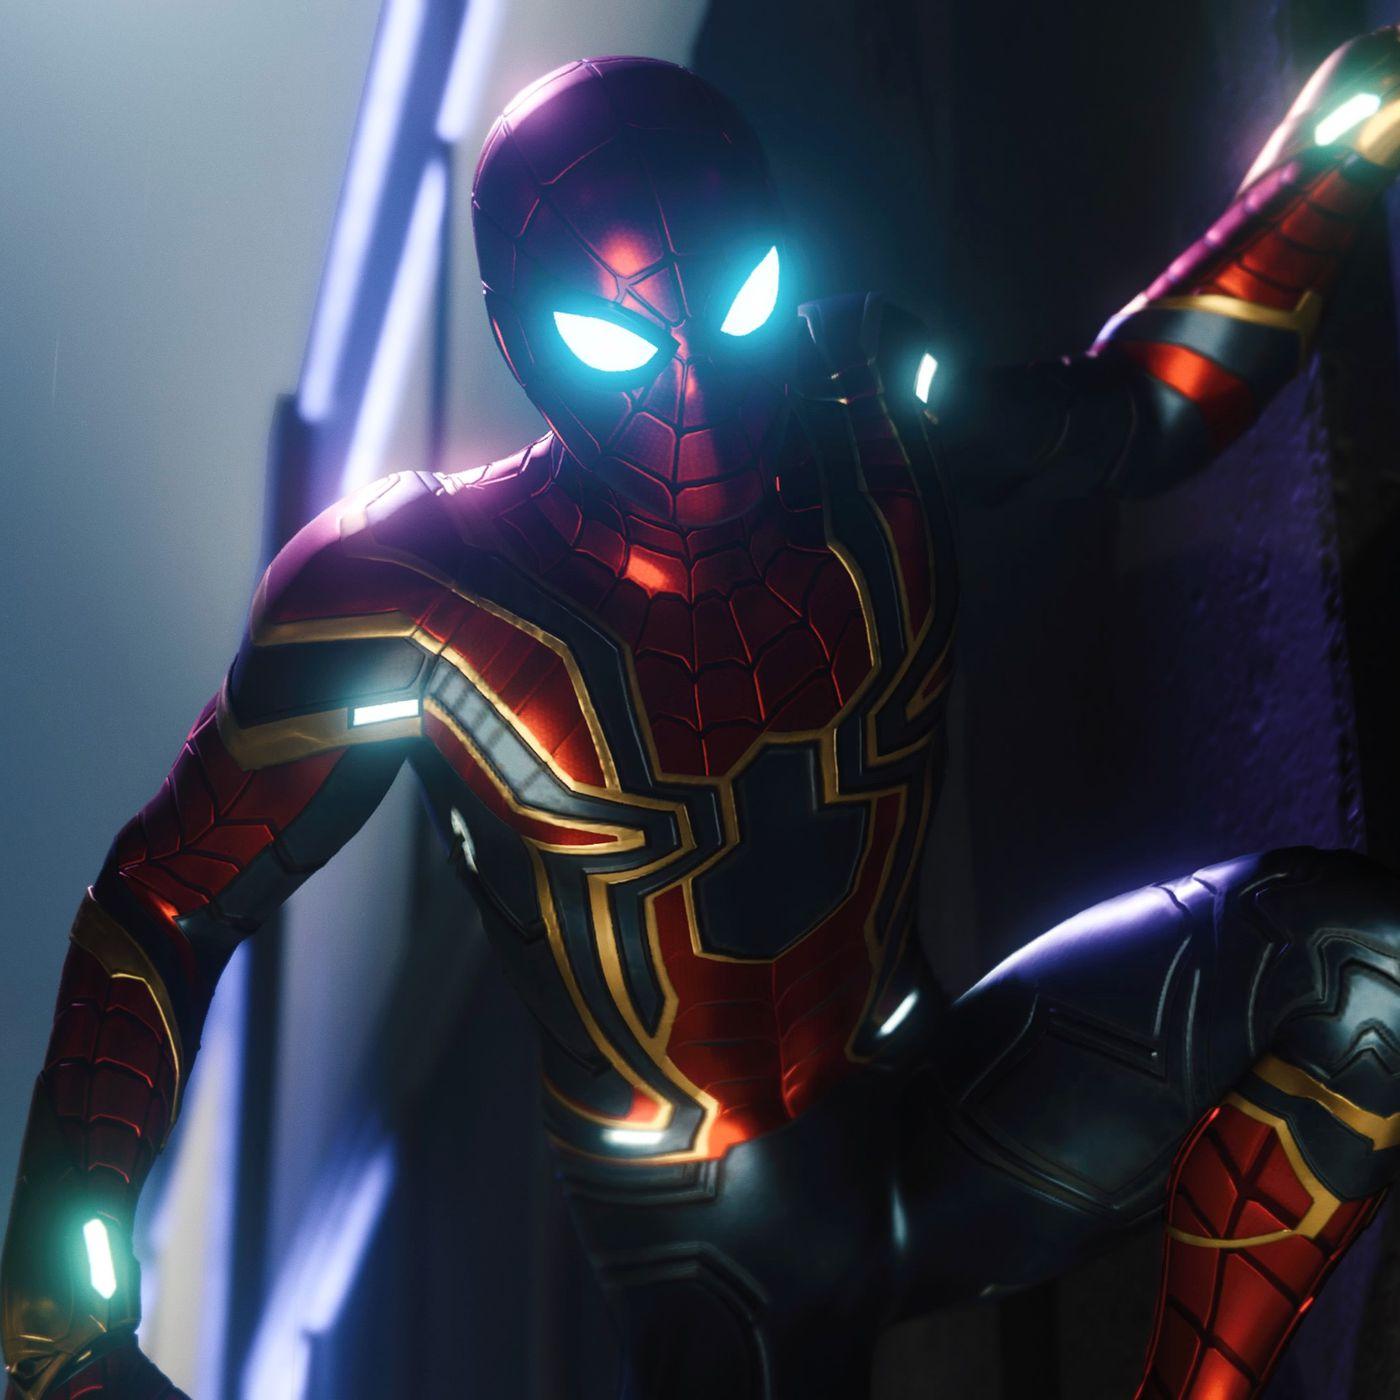 Spider Man PS4 Suits: Every Costume & Comic Book Connection